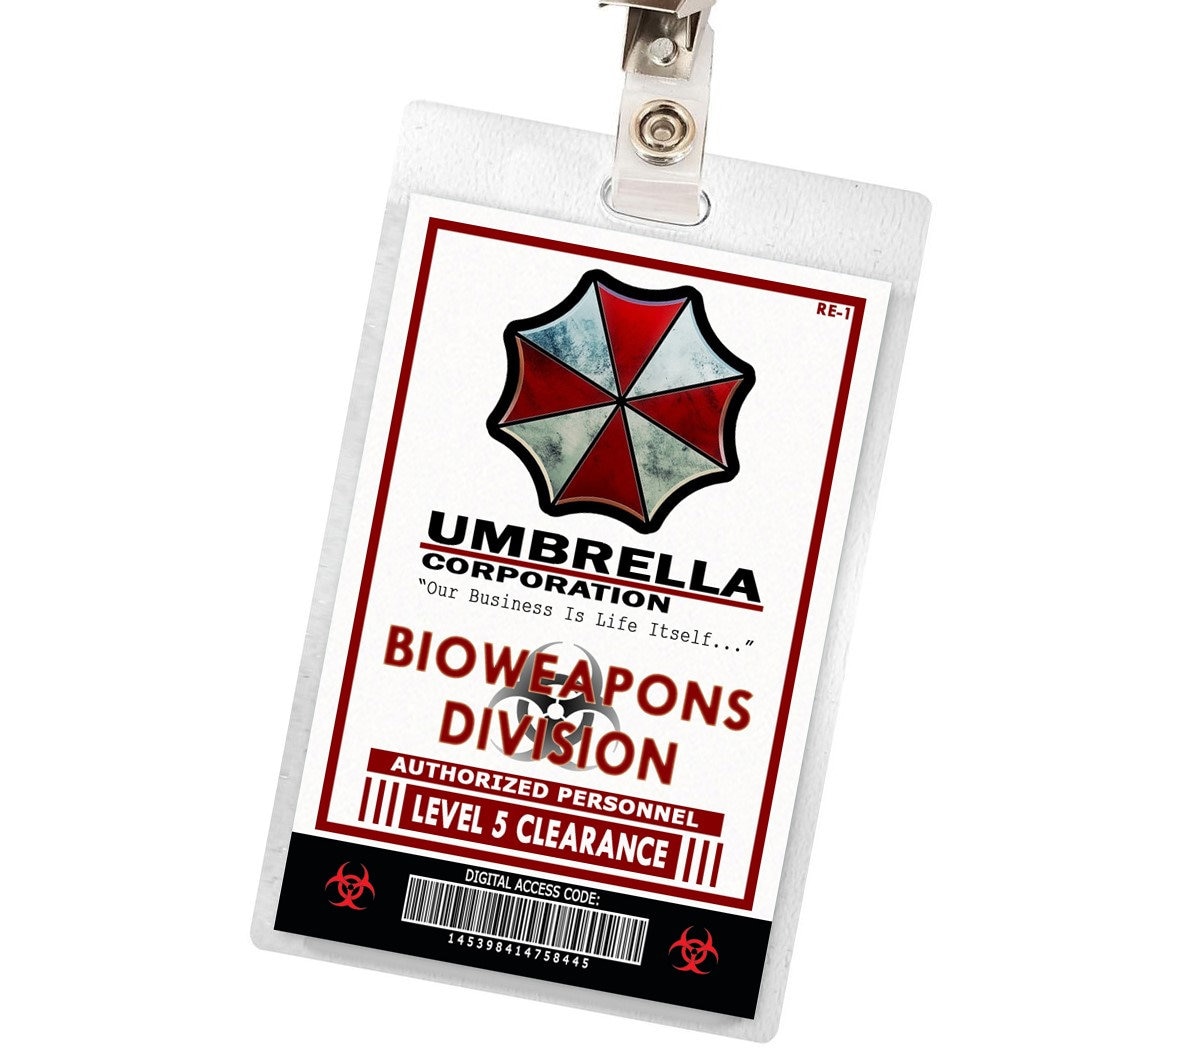 What would happen if the Umbrella Corporation was a real company